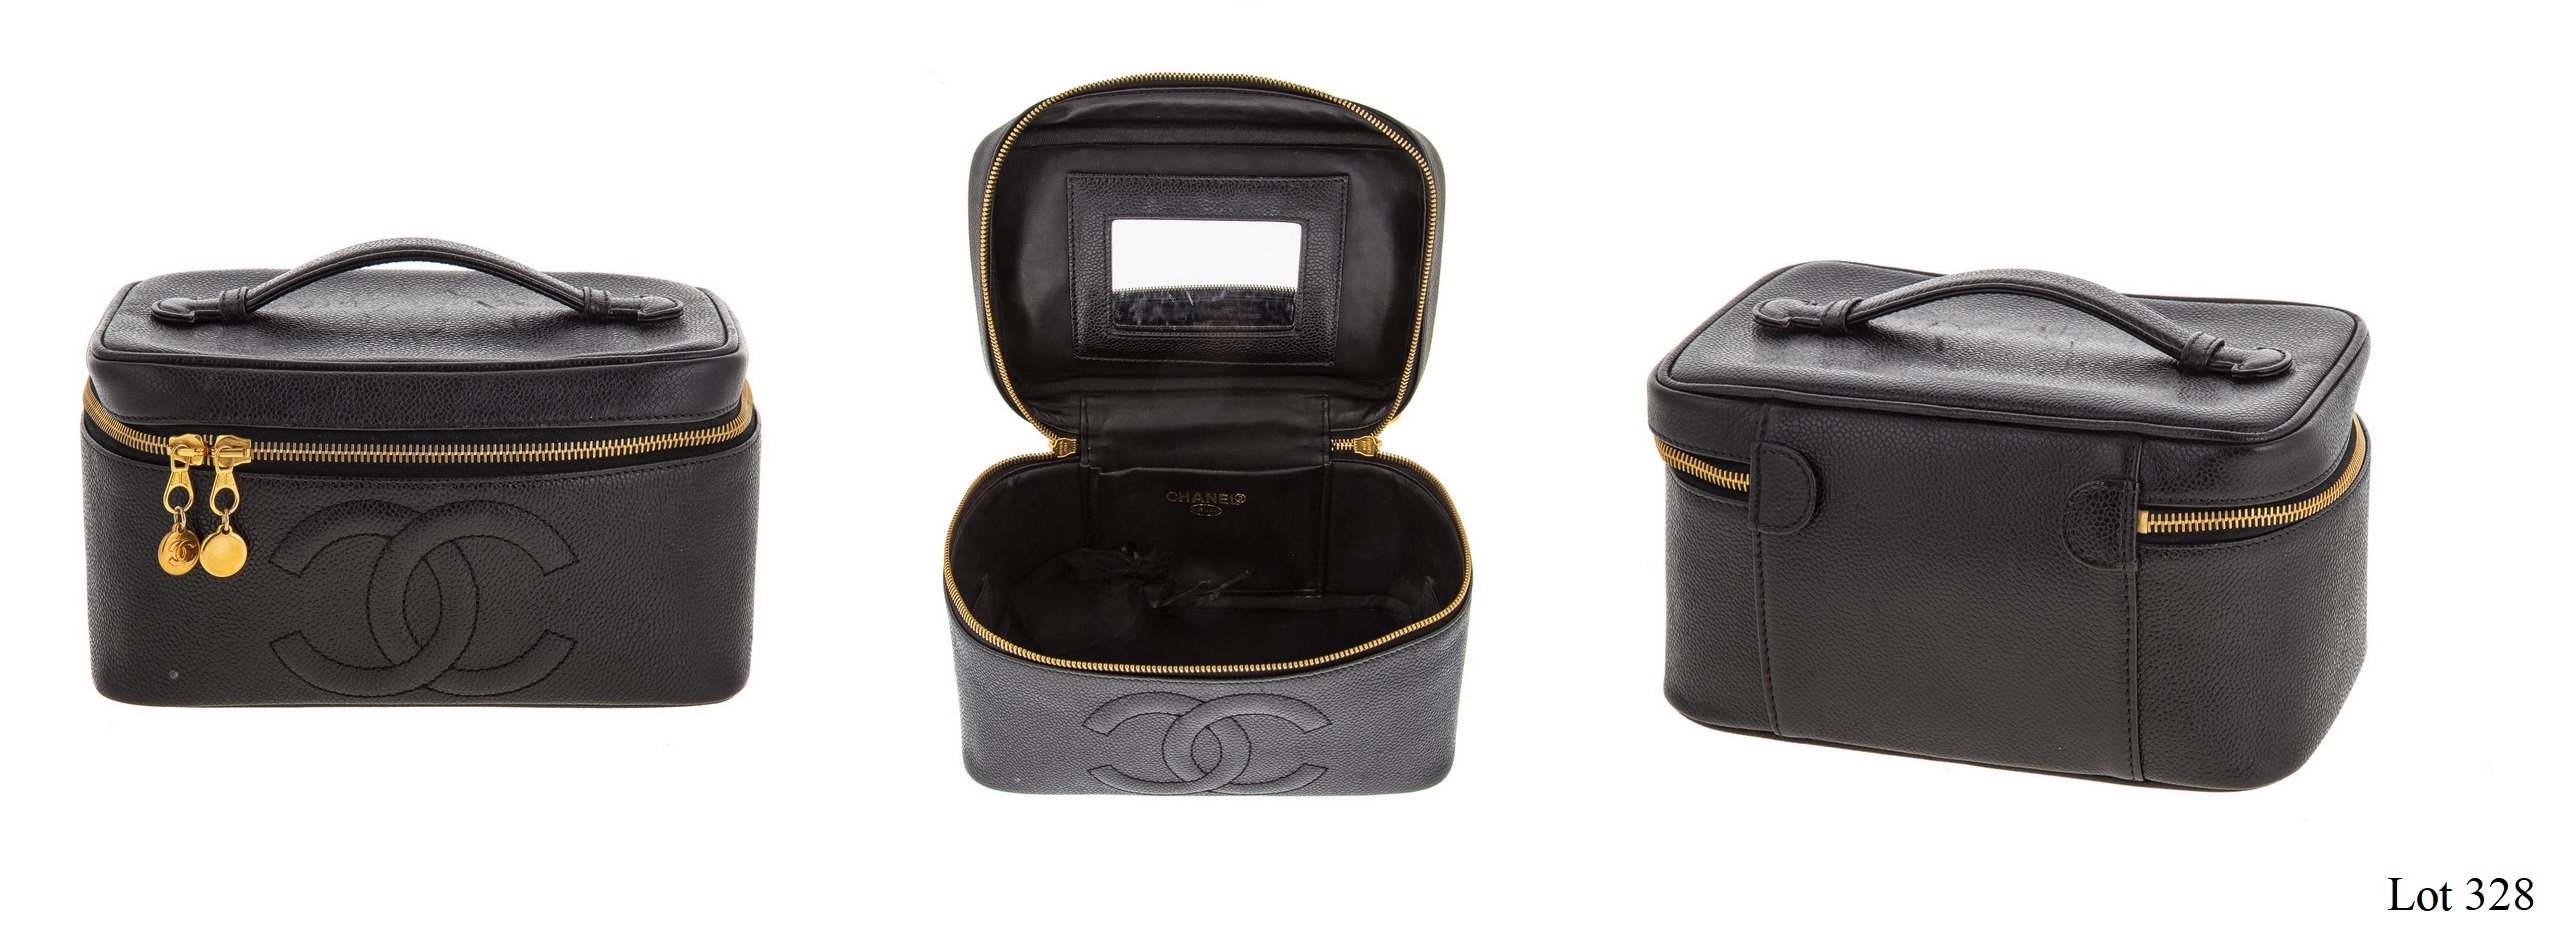 Sold at Auction: Chanel, Chanel black leather make up bag